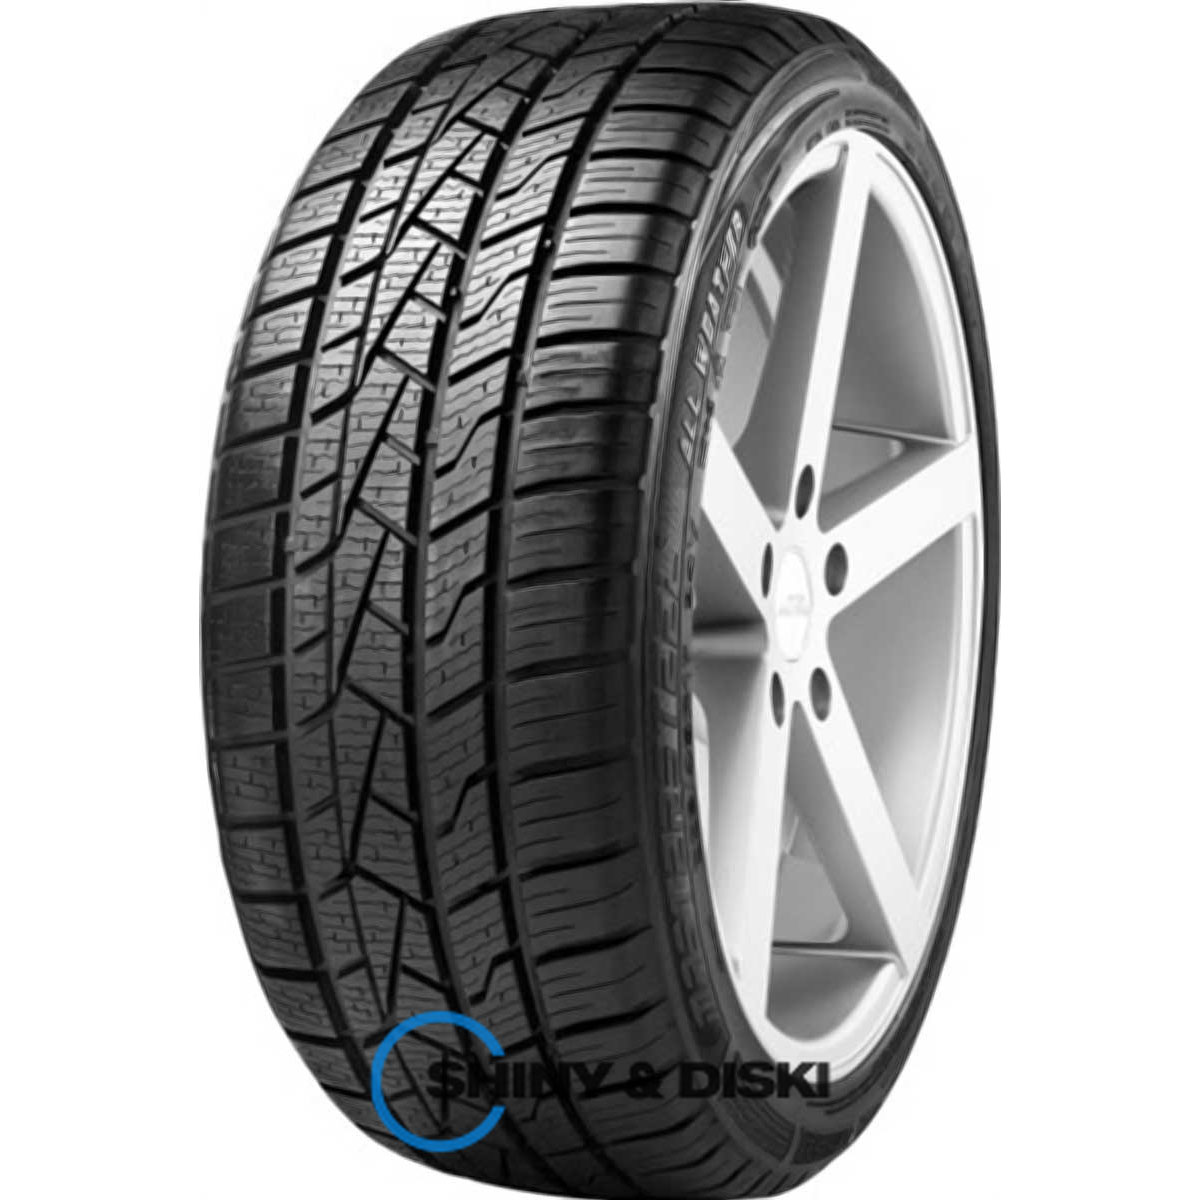 mastersteel all weather 175/65 r15 88h